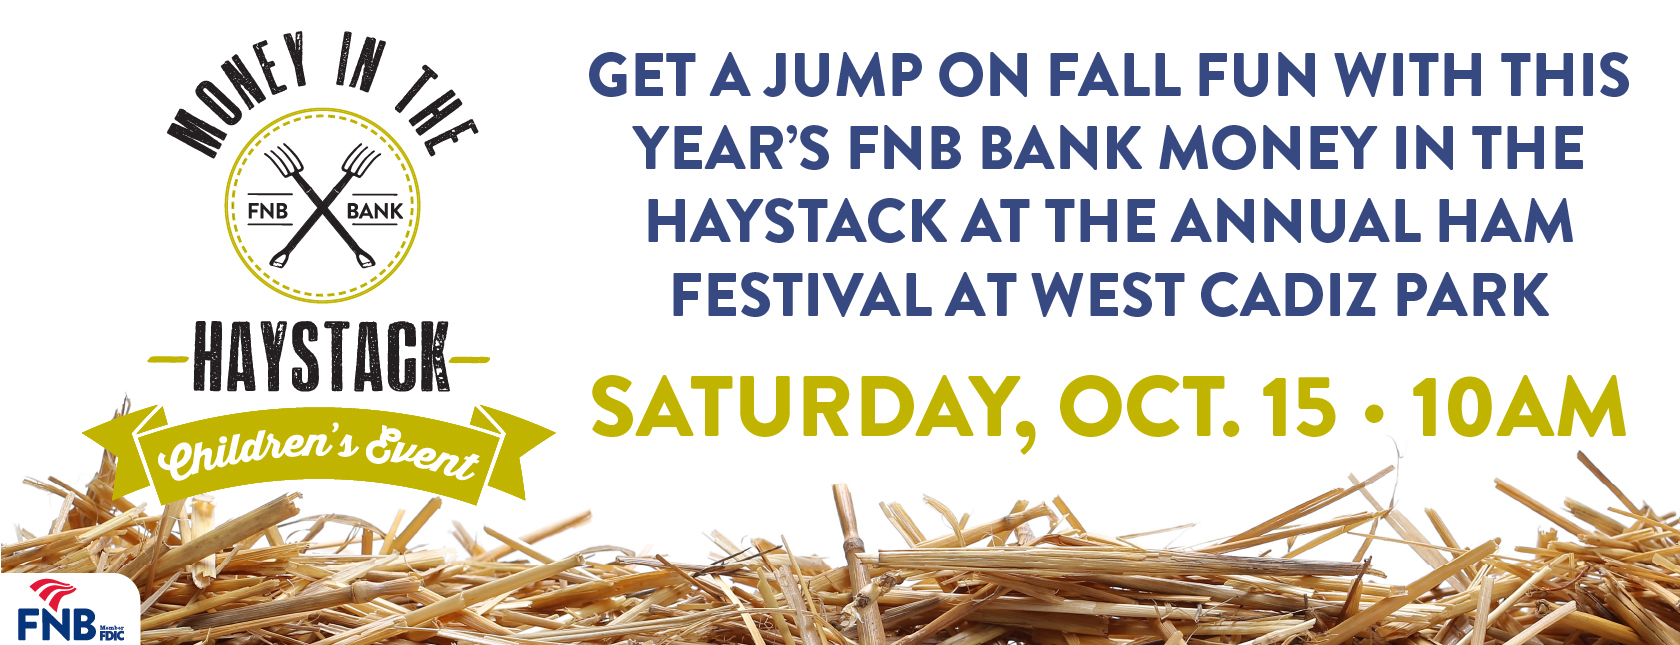 FNB's Money in the Haystack Children's Event on Saturday, October 15th